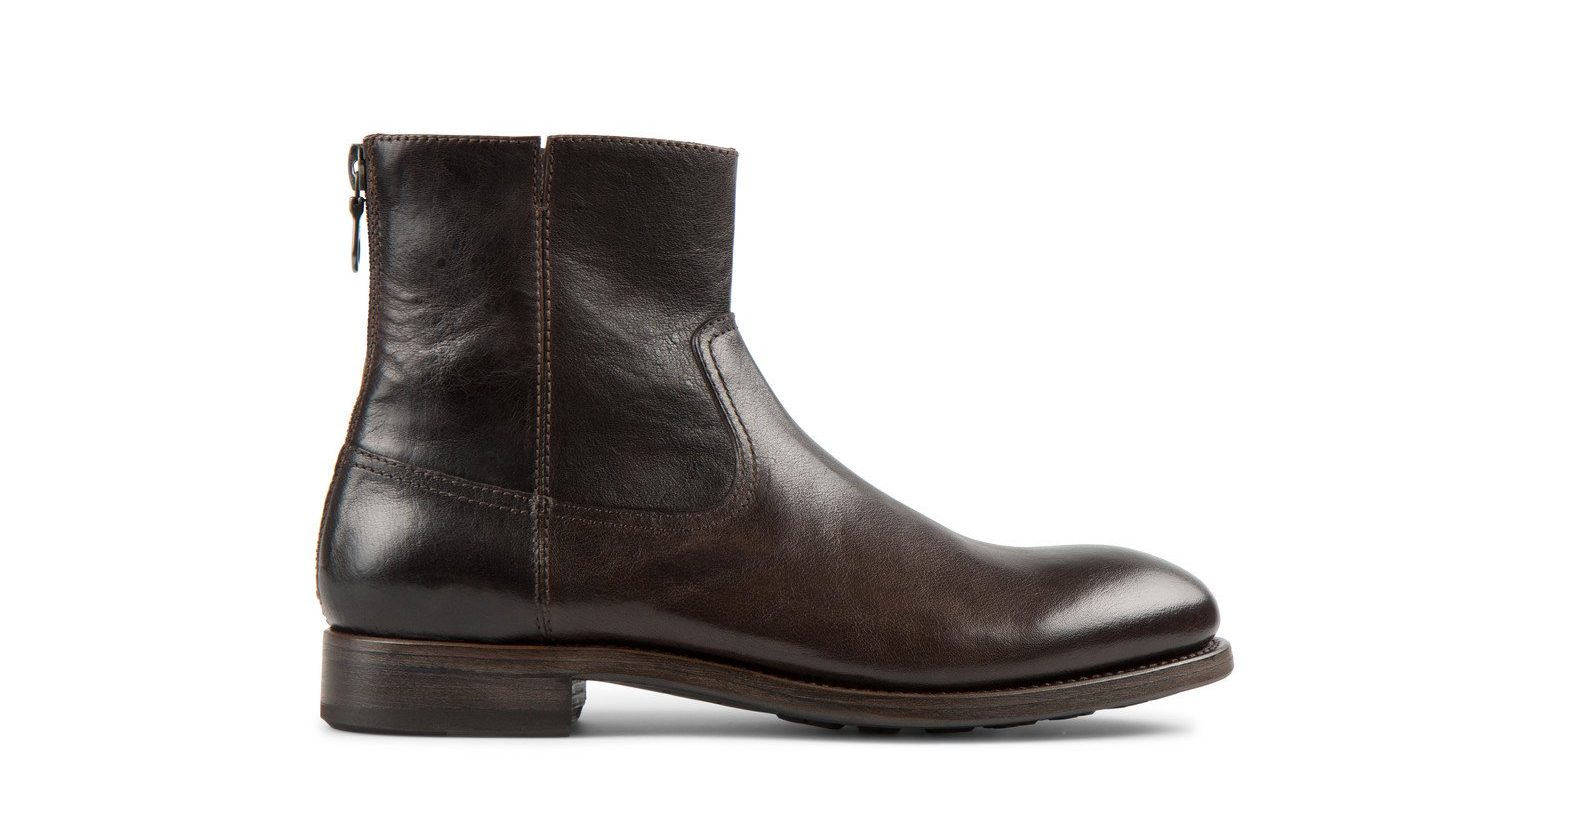 Project TWLV Kangaroo Leather Boots